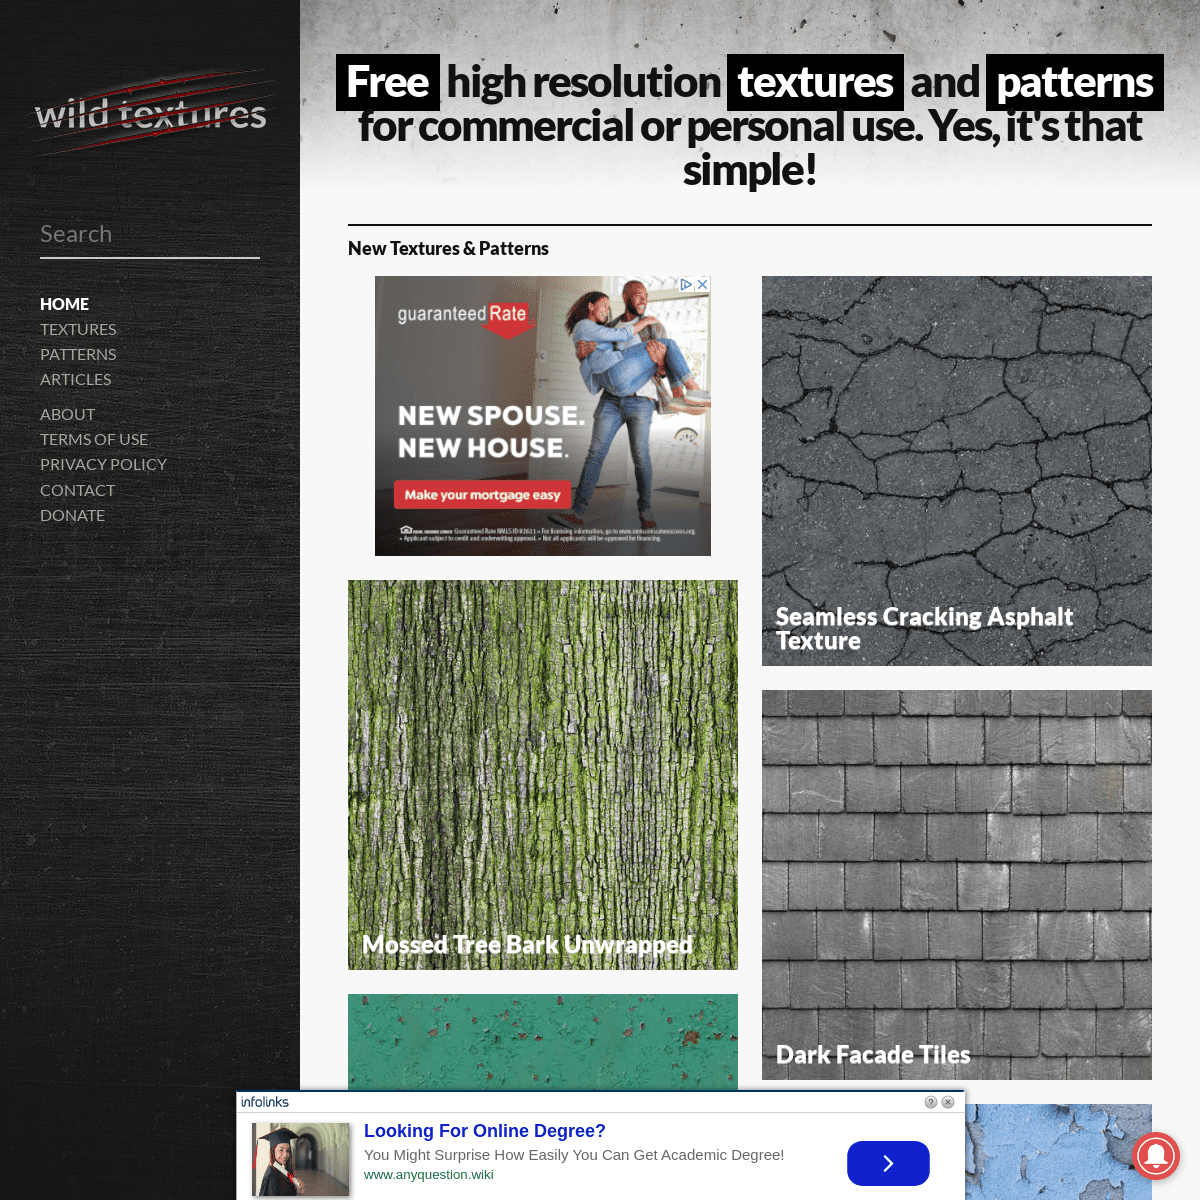 A complete backup of wildtextures.com